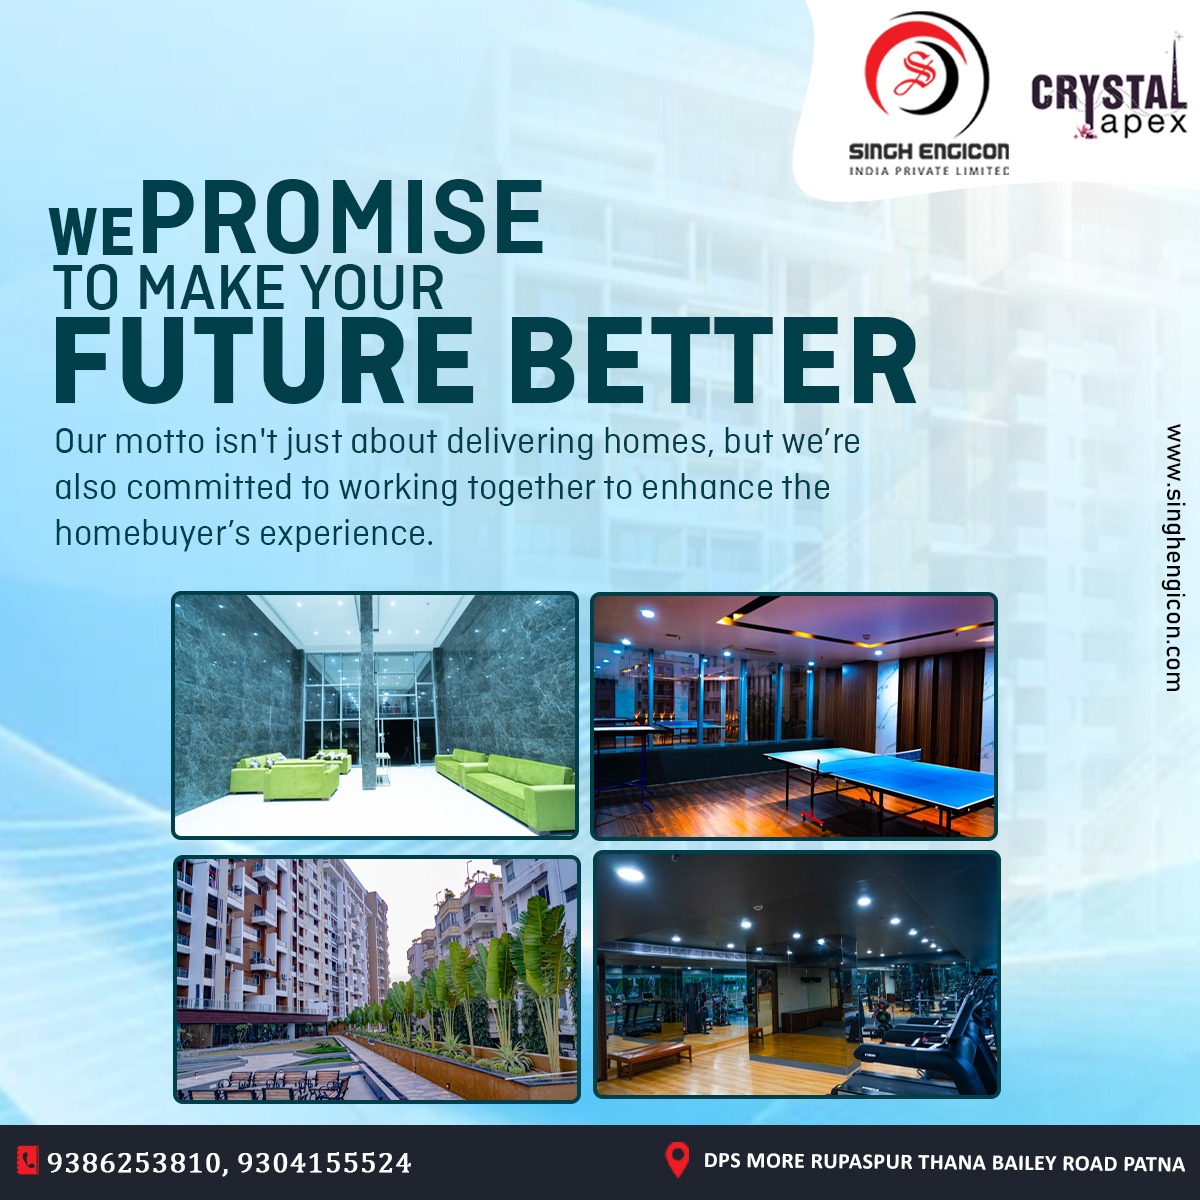 Invest in your future with confidence.

Call Us:- 9386253810, 9304155524
singhengicon.com
#Booknow  

#crystalapex #NewBeginnings #thoughtfulamenities #KidsPlayZone #FamilyFriendly #DreamLiving #flat #Apartments #property #home #singhengicon #Patna #Bihar